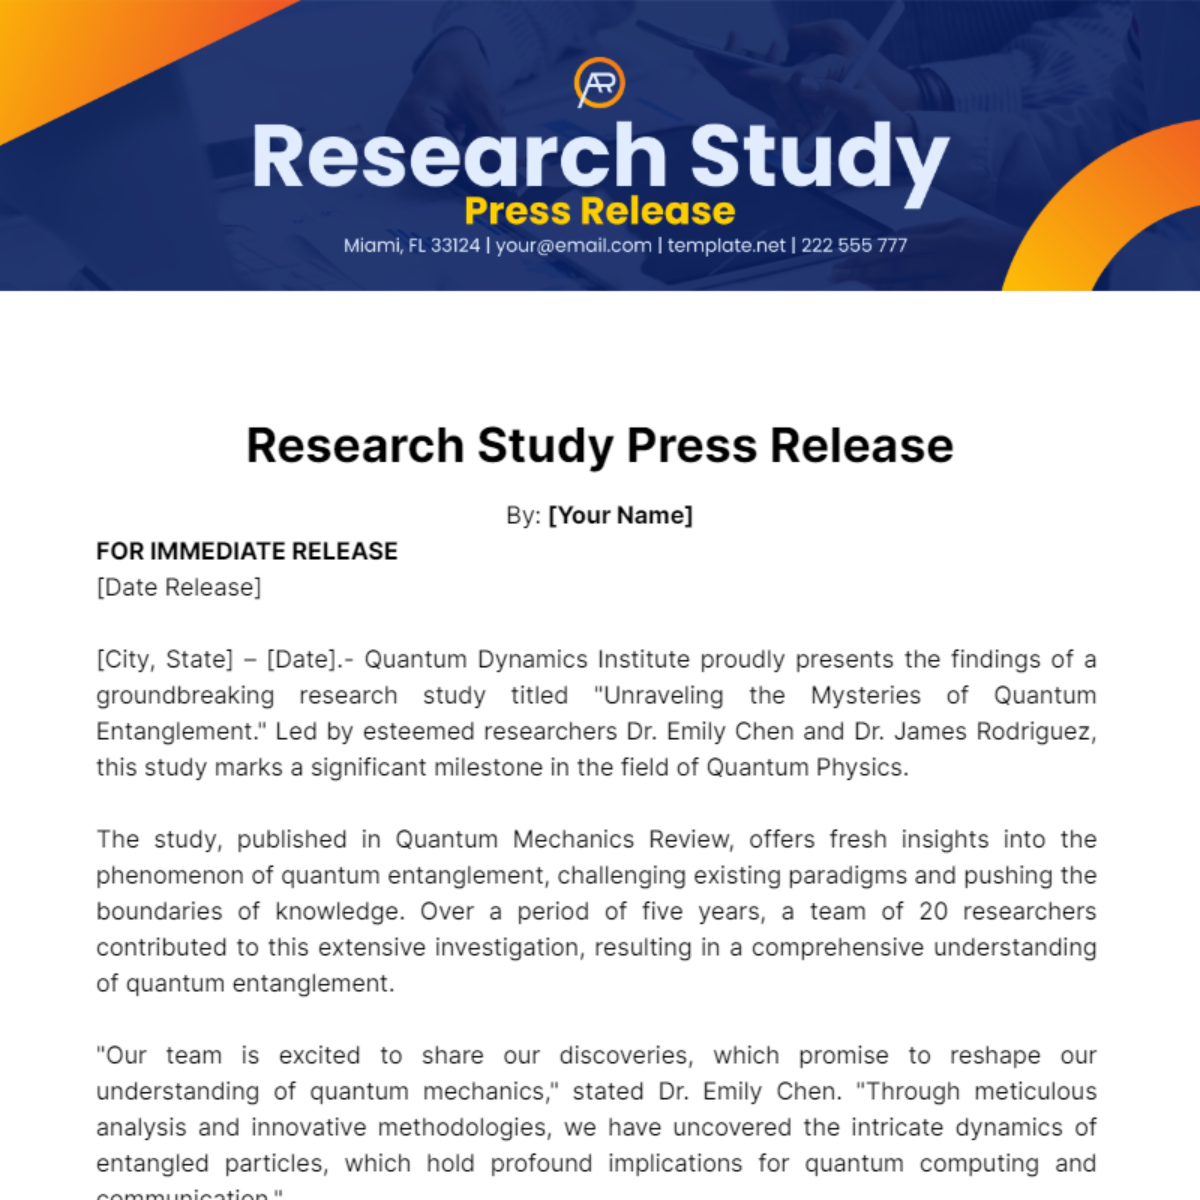 Research Study Press Release Template